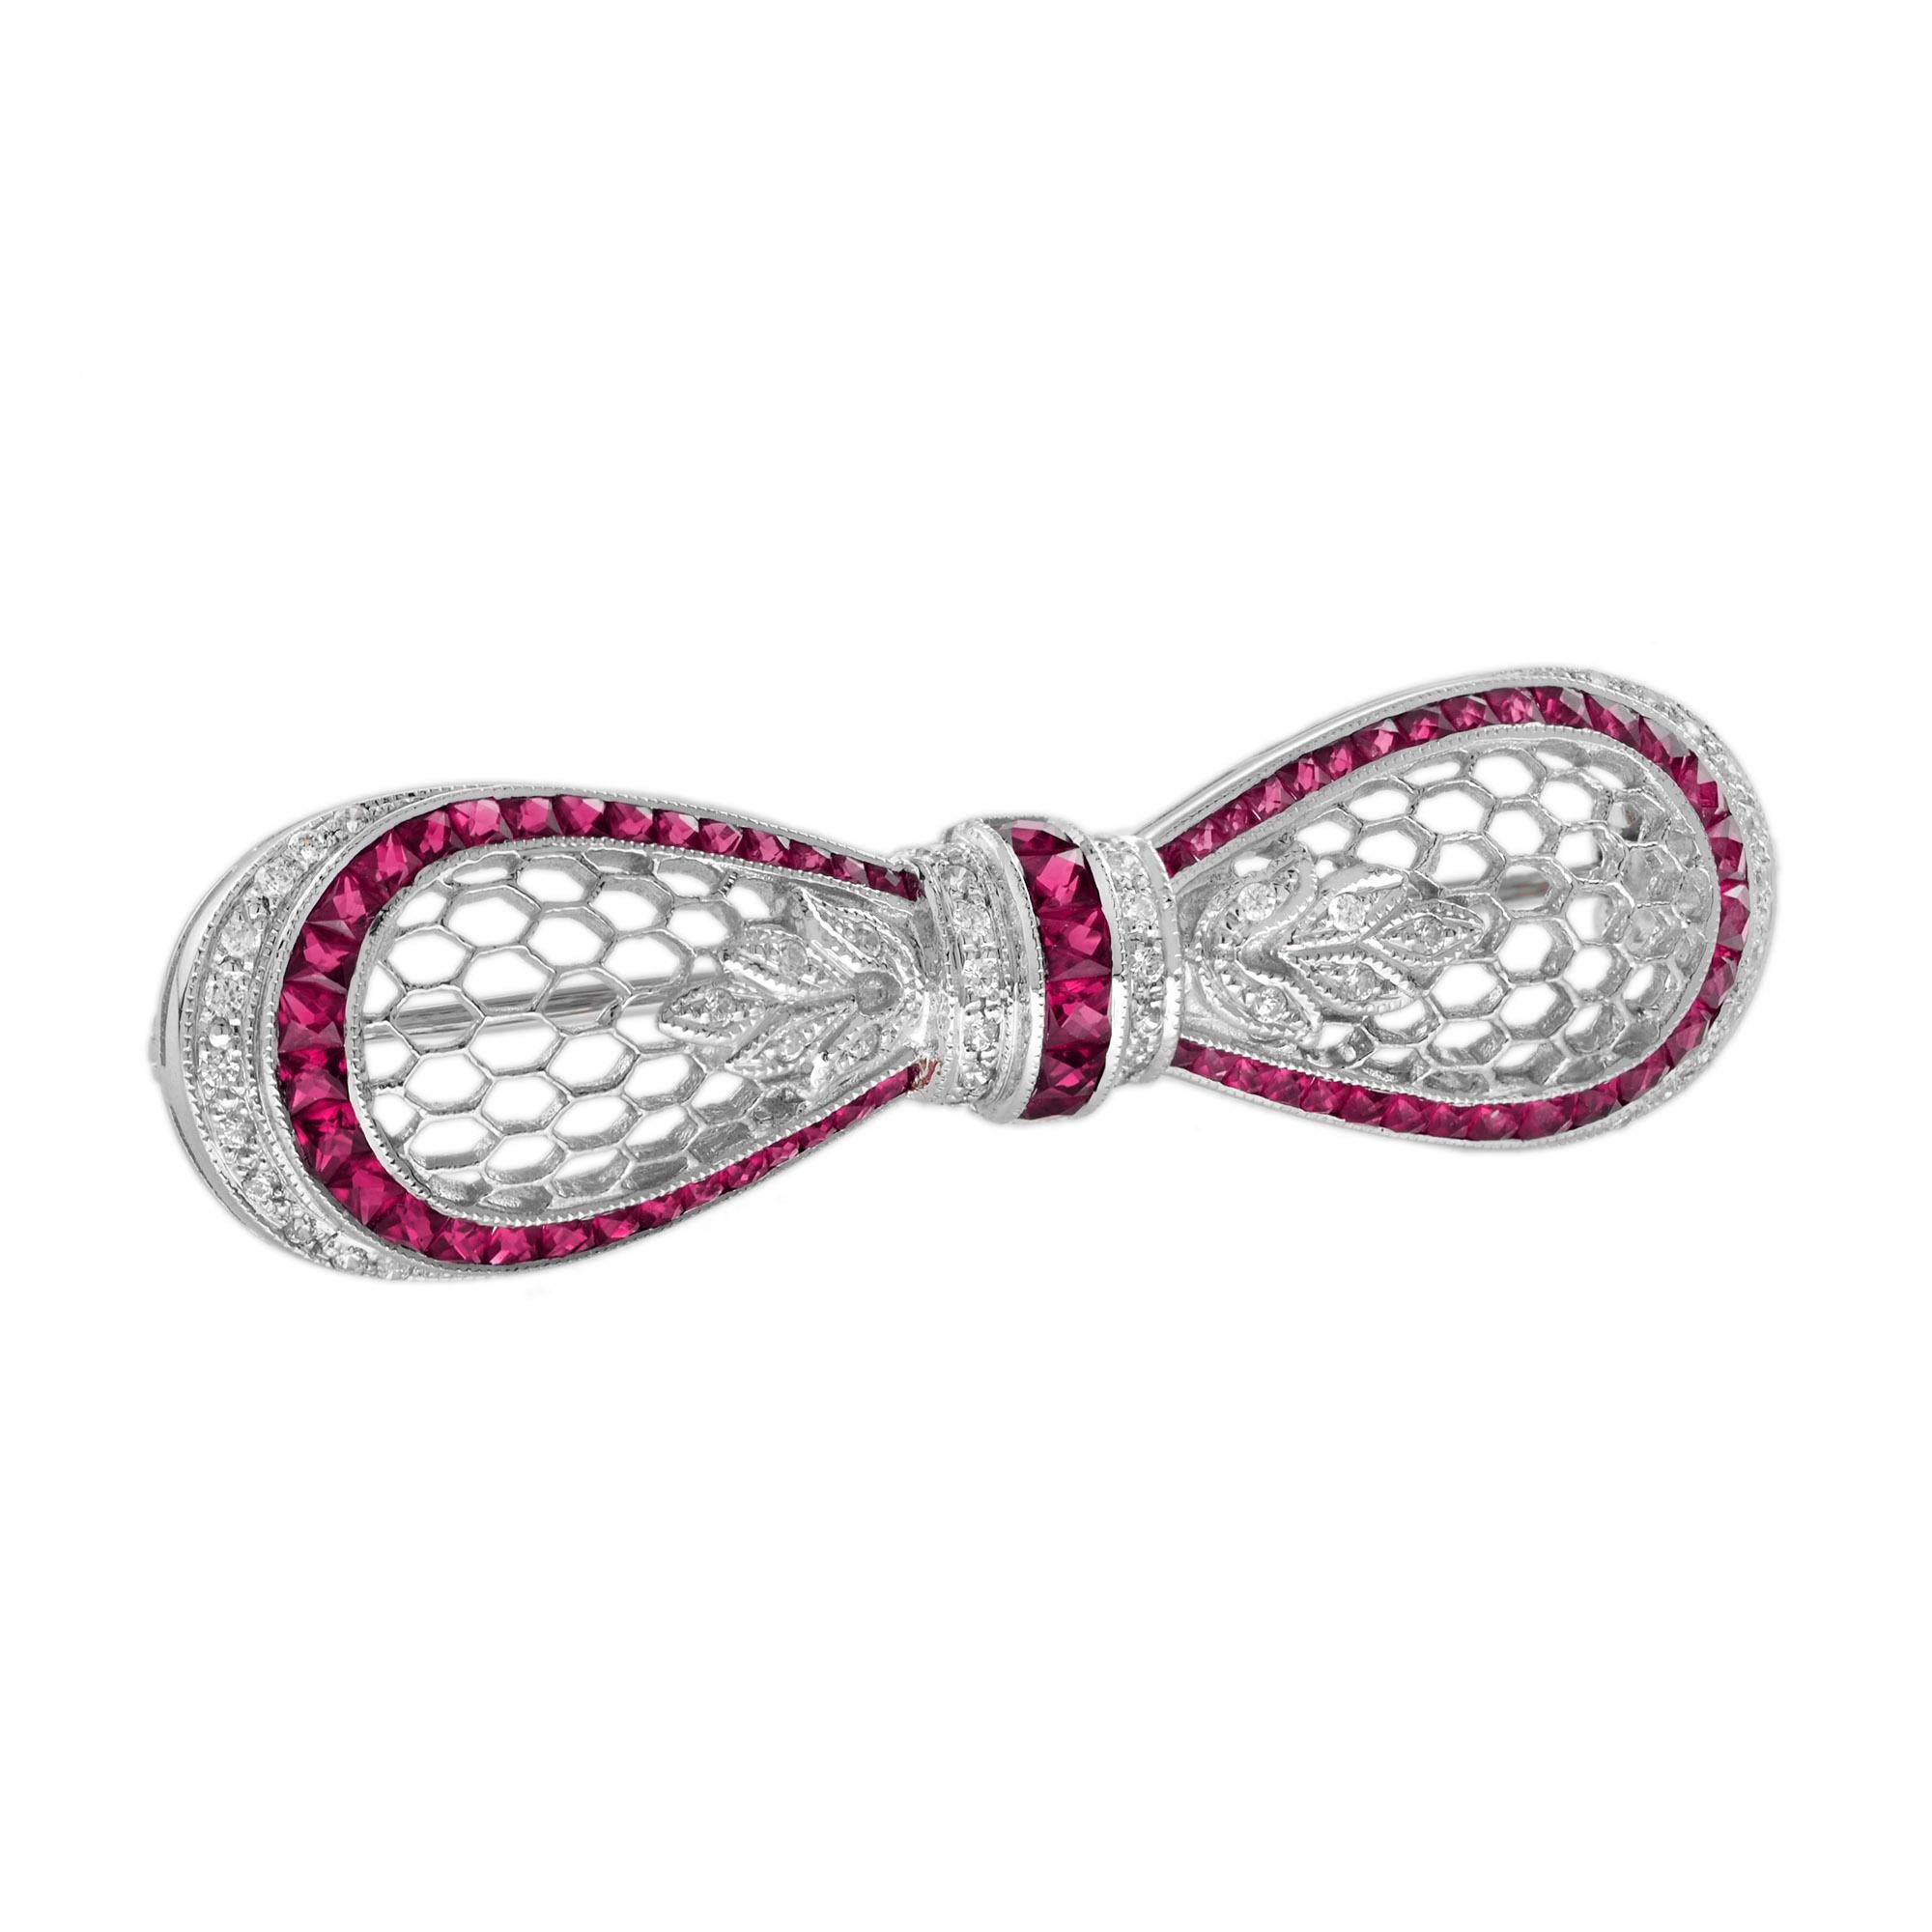 A truly beautiful white gold bow brooch set with diamonds and French cut rubies. The milgraining of the metal edges allow the diamonds and gemstones to sparkle without competing with the reflected light from a highly polished white gold edge.